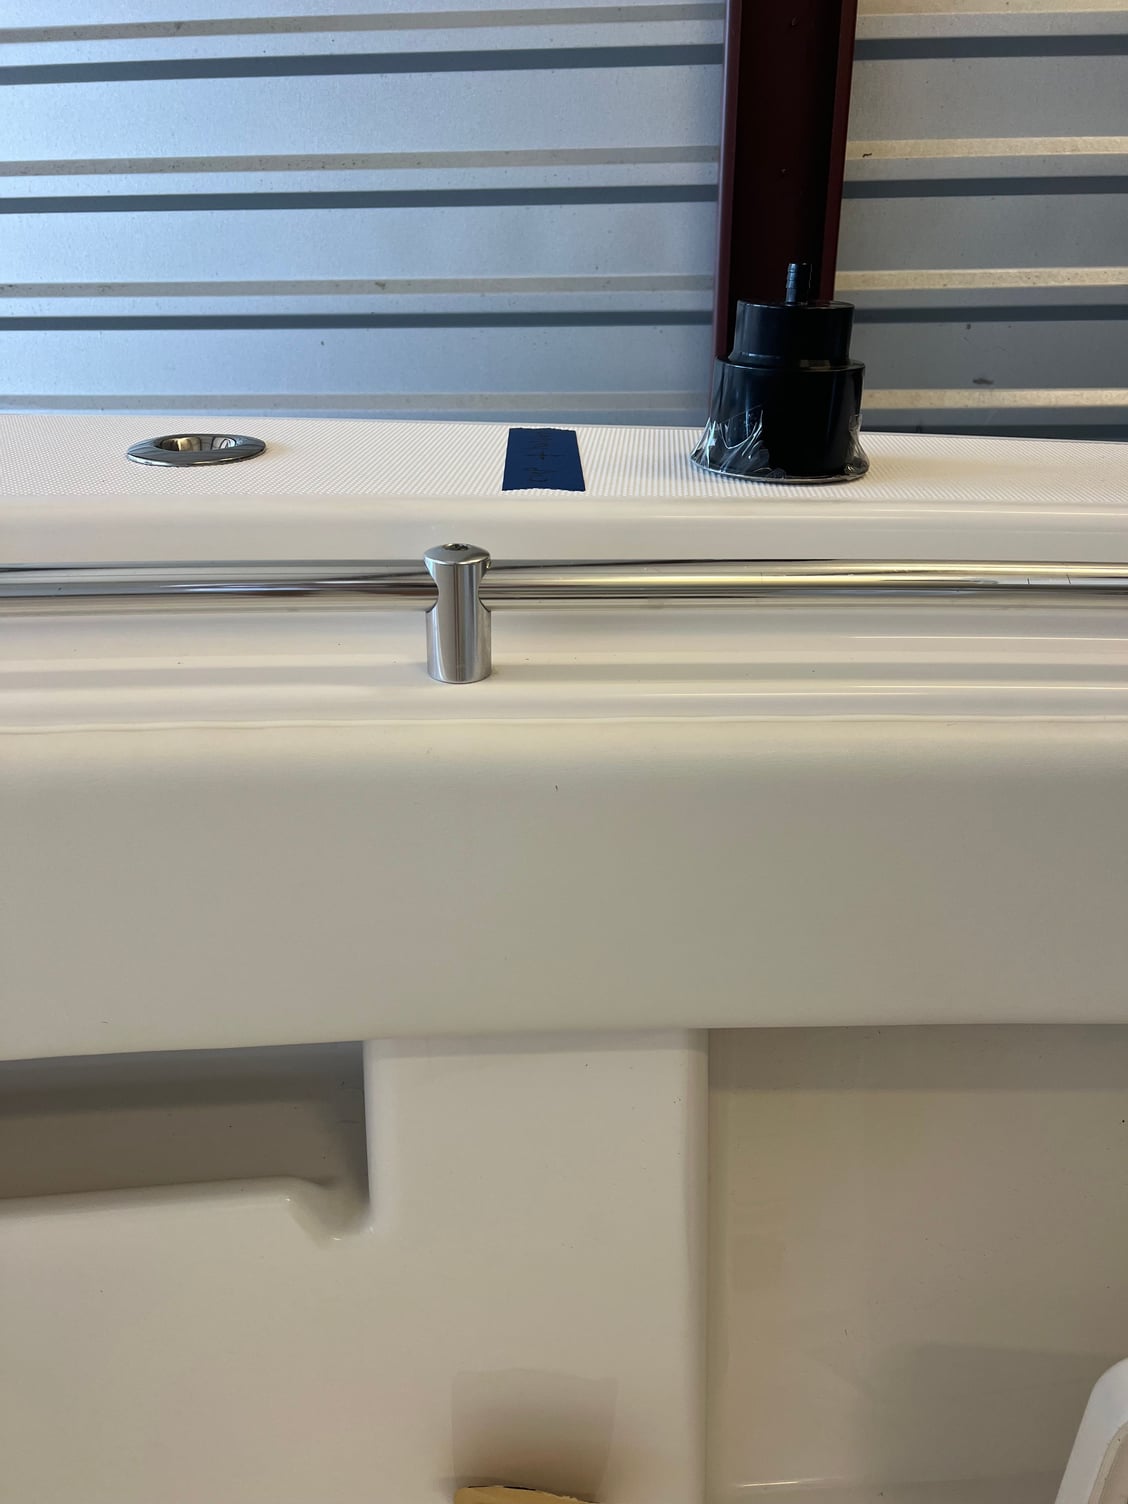 Installing flush mount rod holders in fiberglass - The Hull Truth - Boating  and Fishing Forum